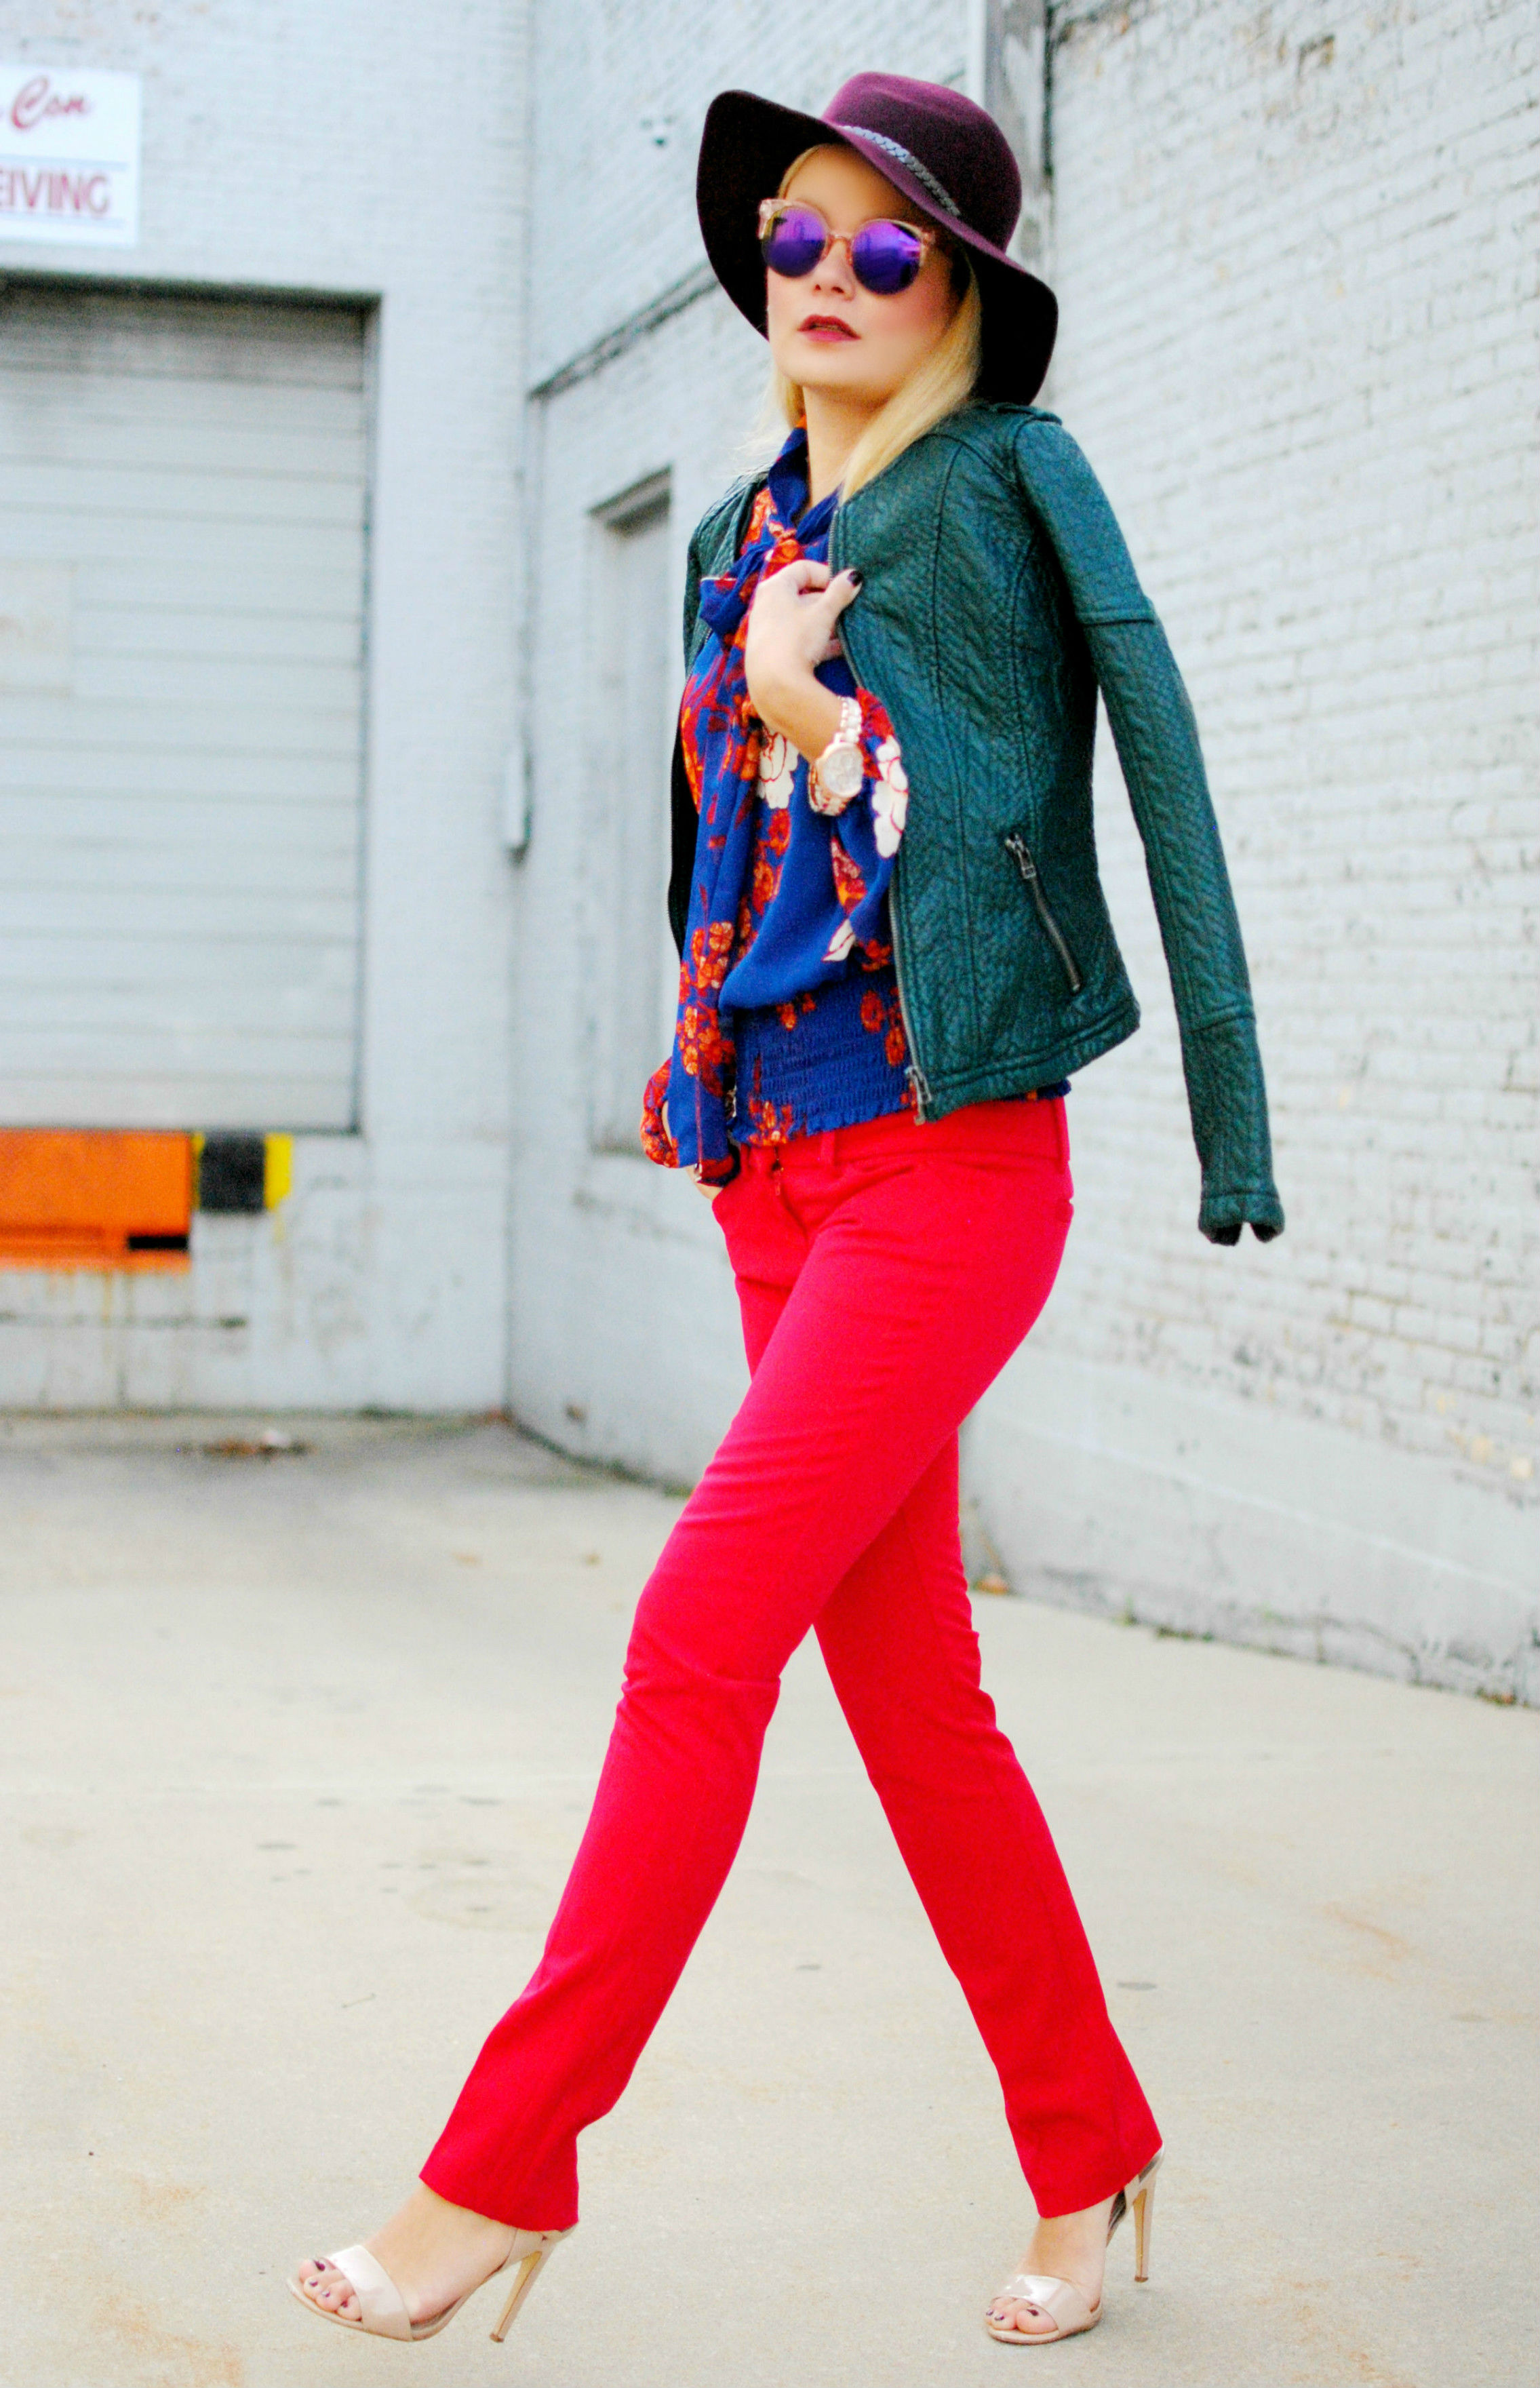 New York & Company_Red Pants_Moto Jacket_Eva Mendes Collection_What Would V Wear